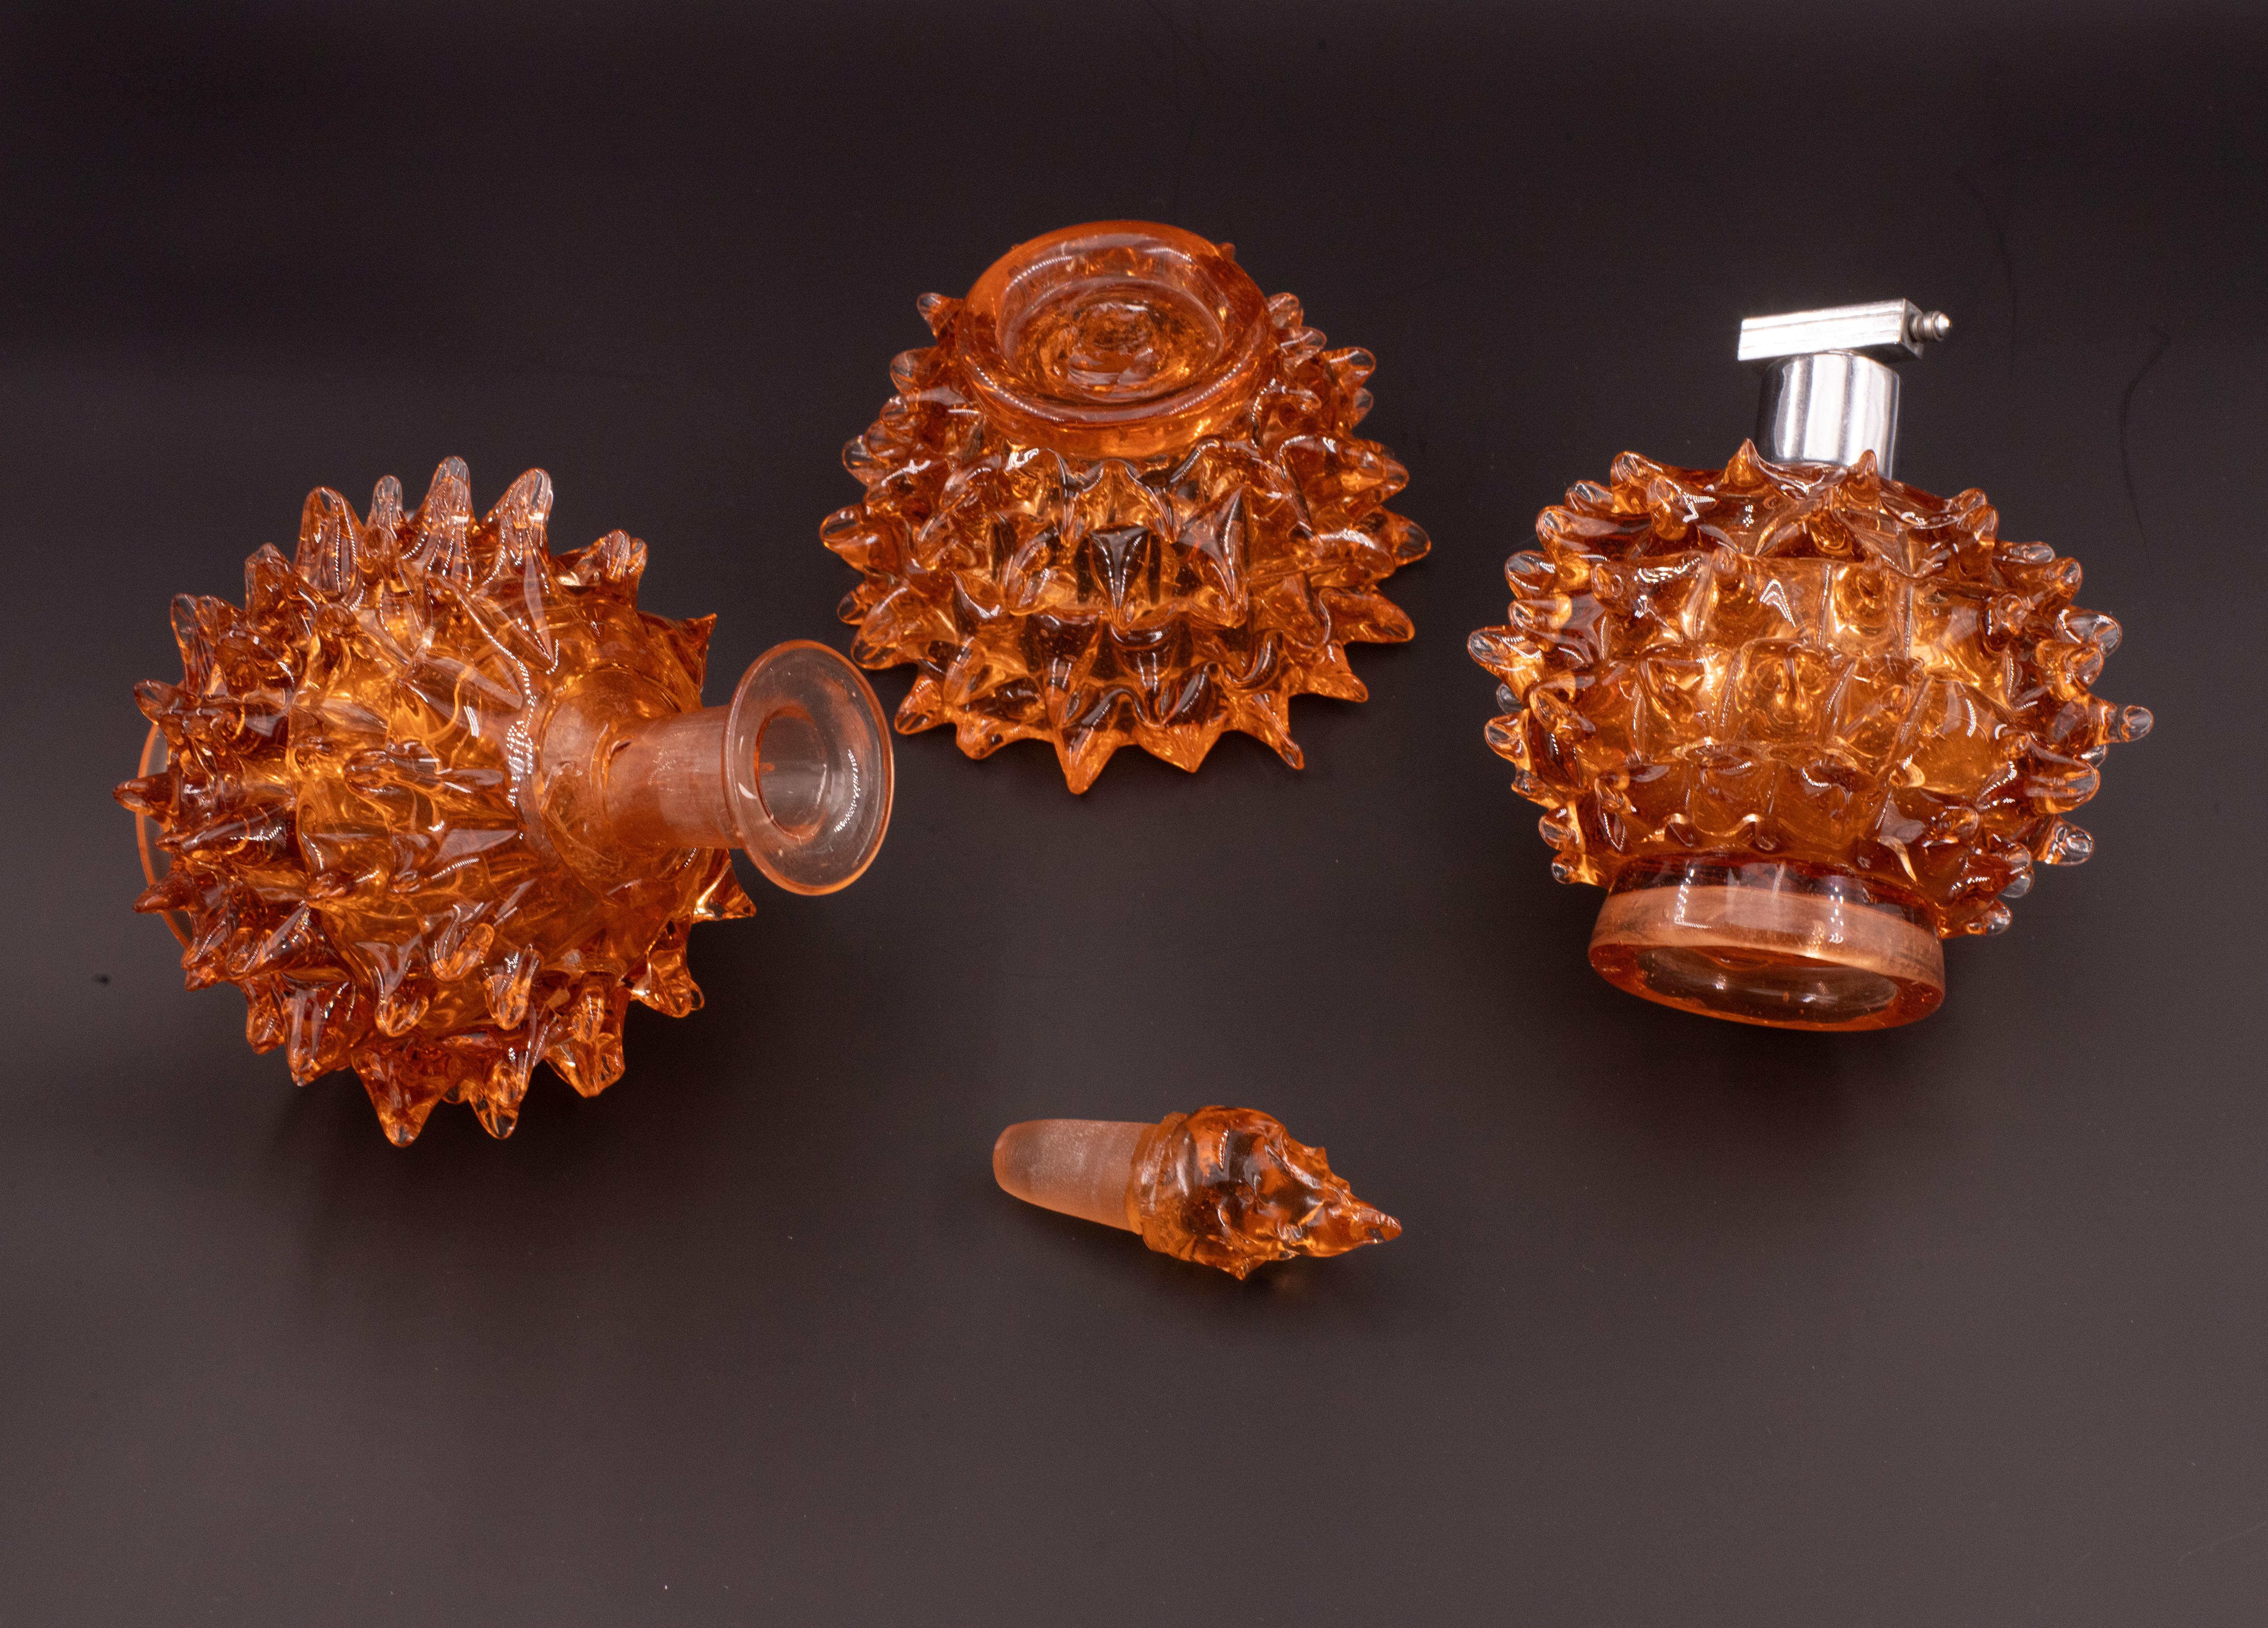 Rare Set of 3 Amber Rostrato Murano Glass Vases by Barovier & Toso, 1940s For Sale 2